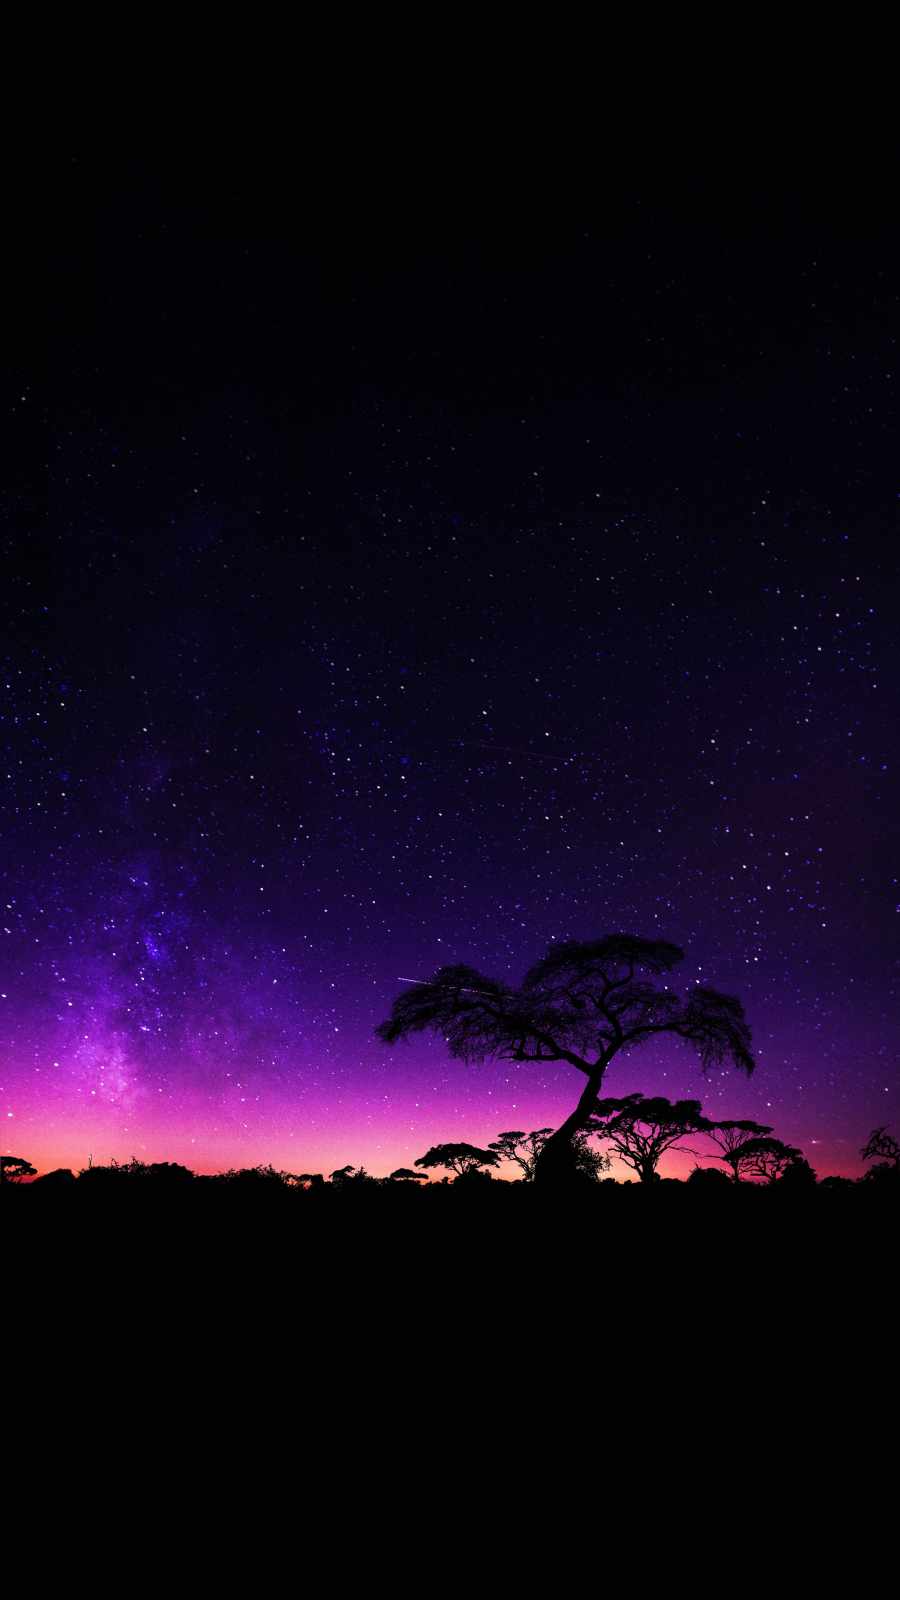 Starry Night Trees IPhone Wallpaper - IPhone Wallpapers : iPhone Wallpapers